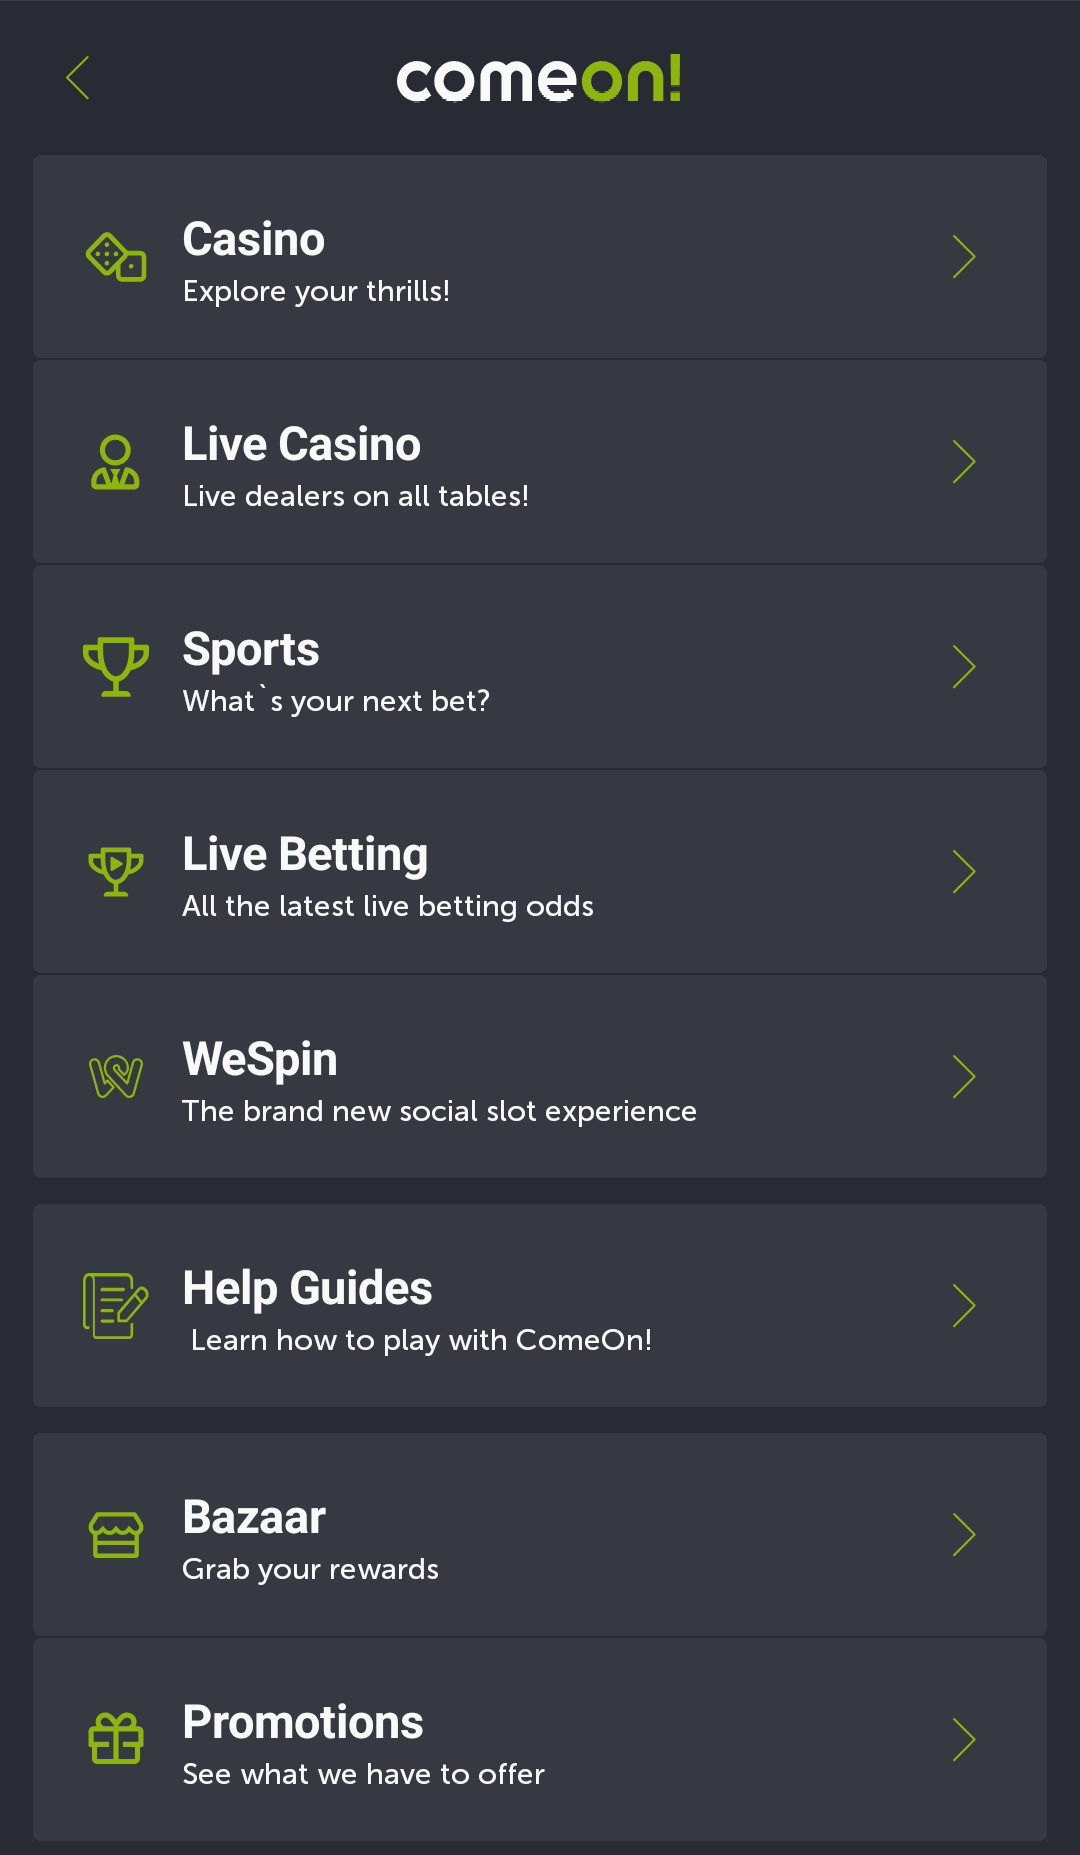 Main menu and navigation in the mobile sports betting app ComeOn!